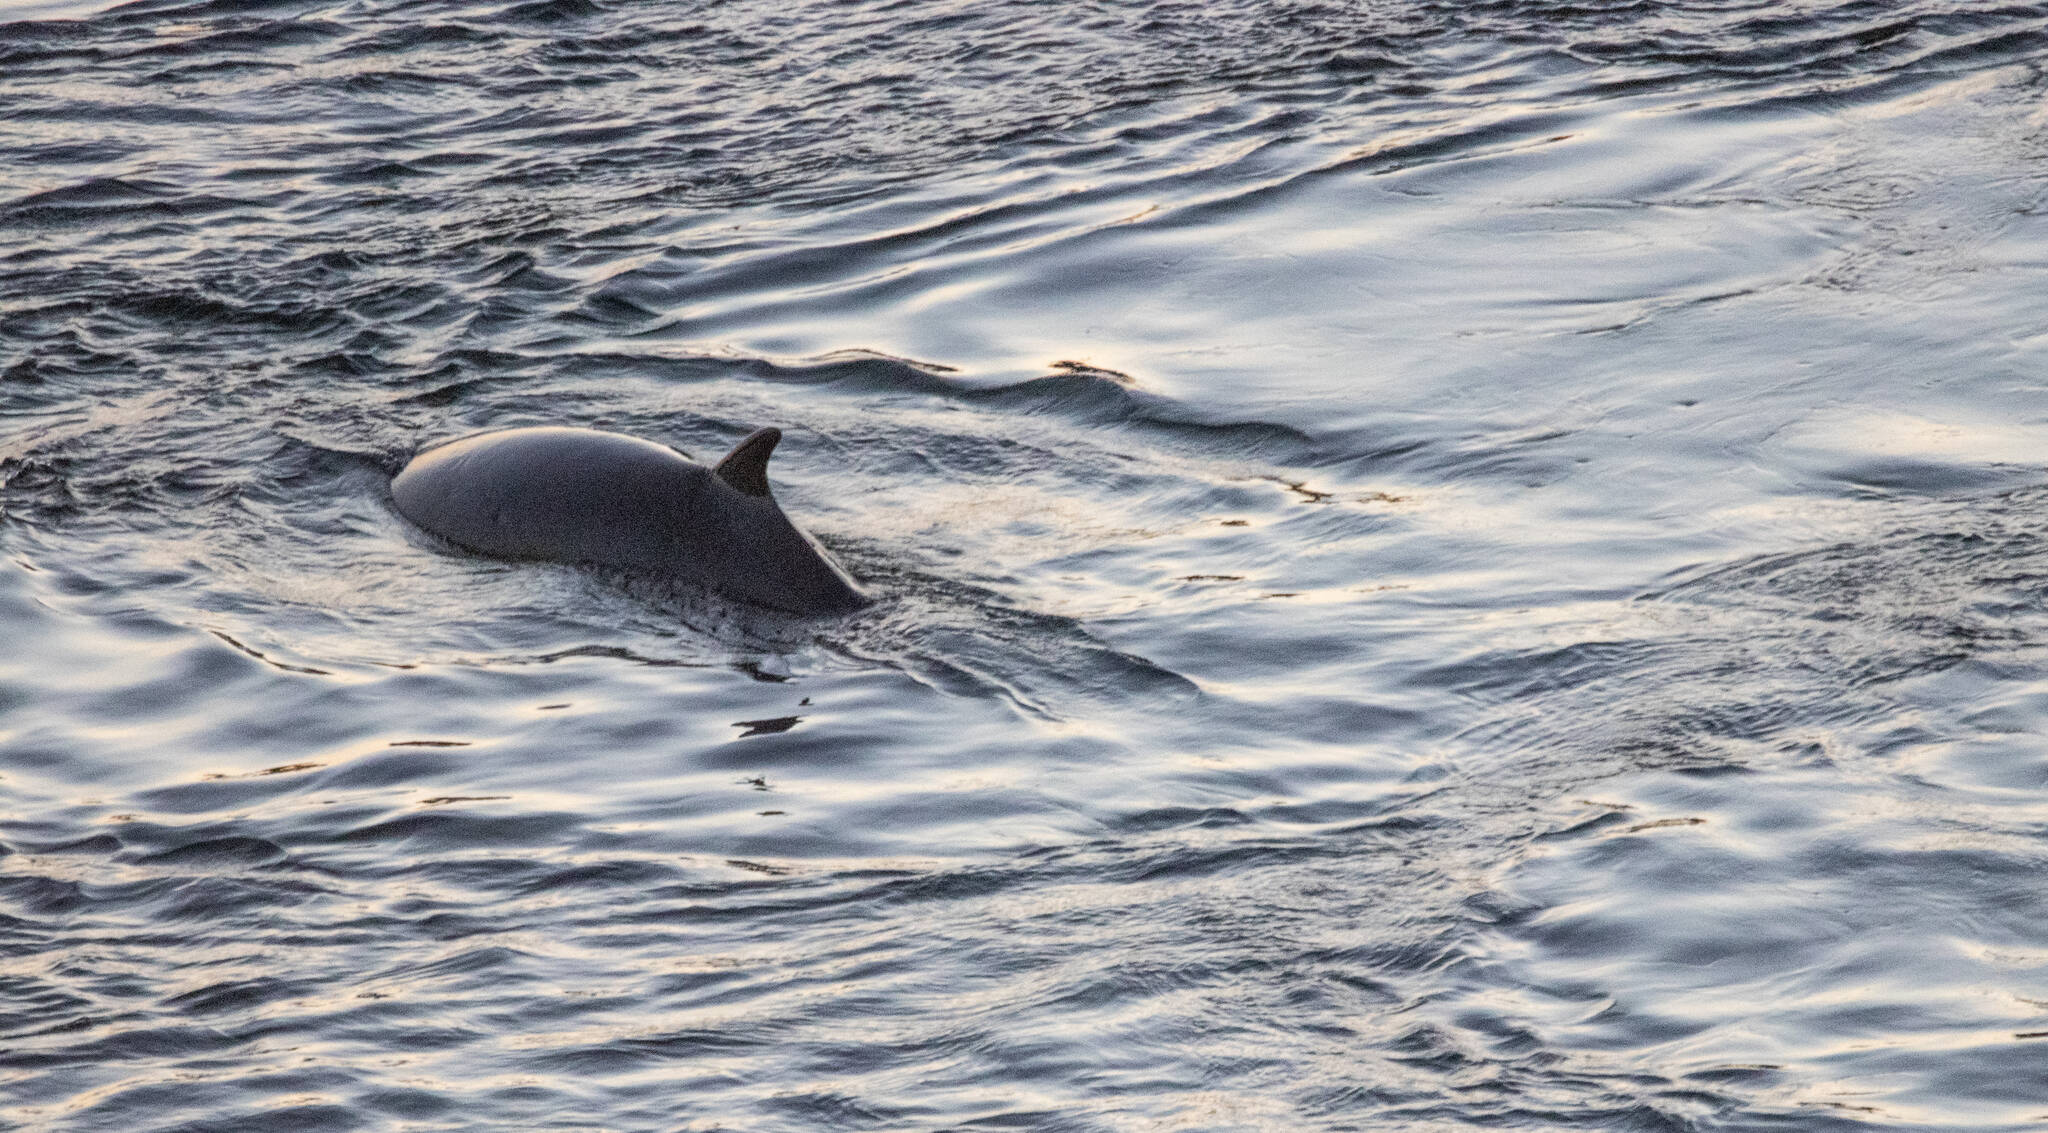 Photo by Rachel Haight/Orca Network
A minke whale was spotted swimming near Deception Pass Bridge the night of July 11.